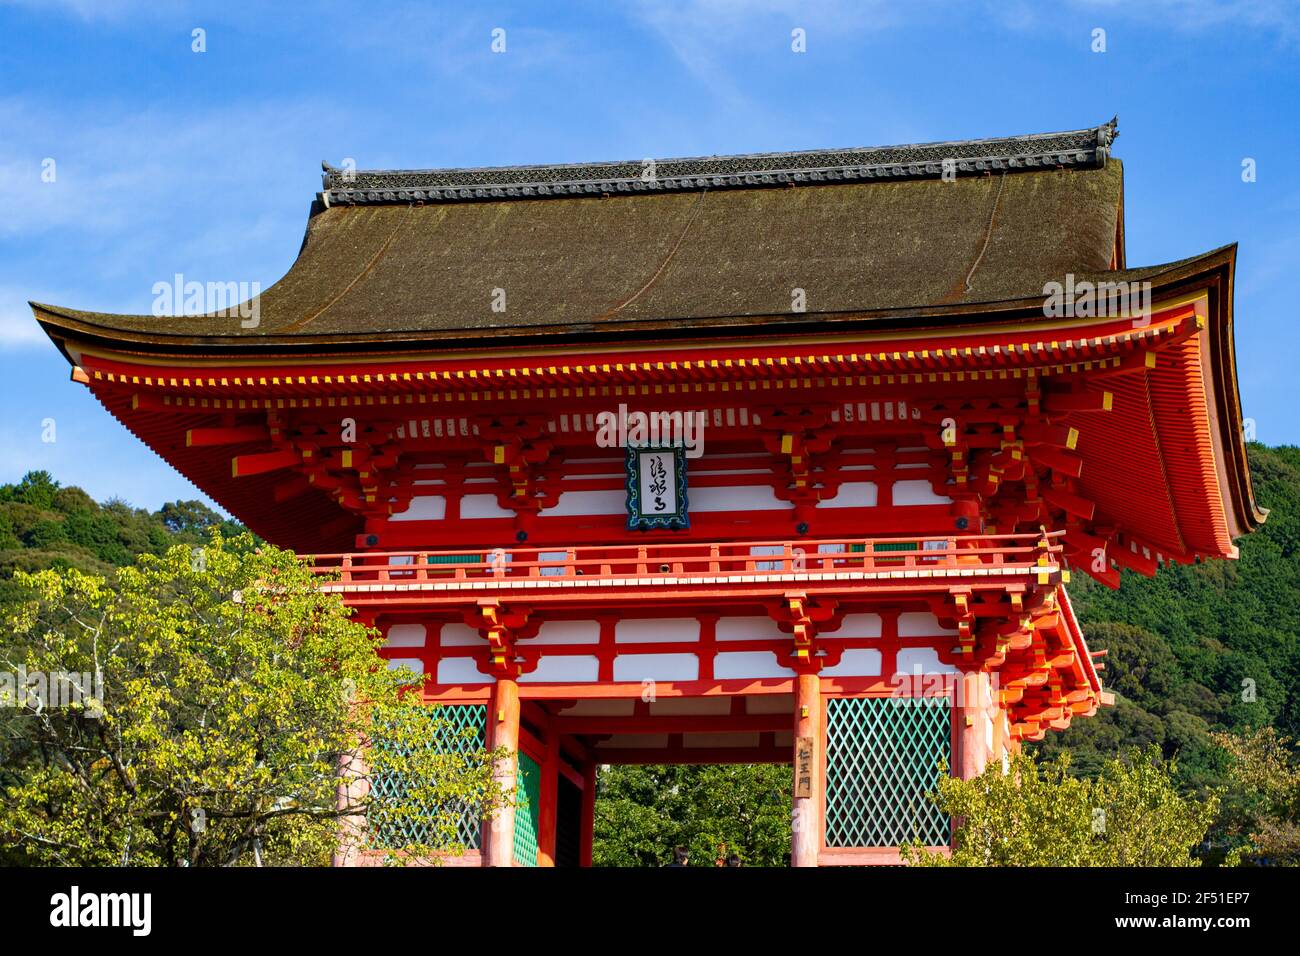 Outstanding Japanese Temple Gate Stock Photo